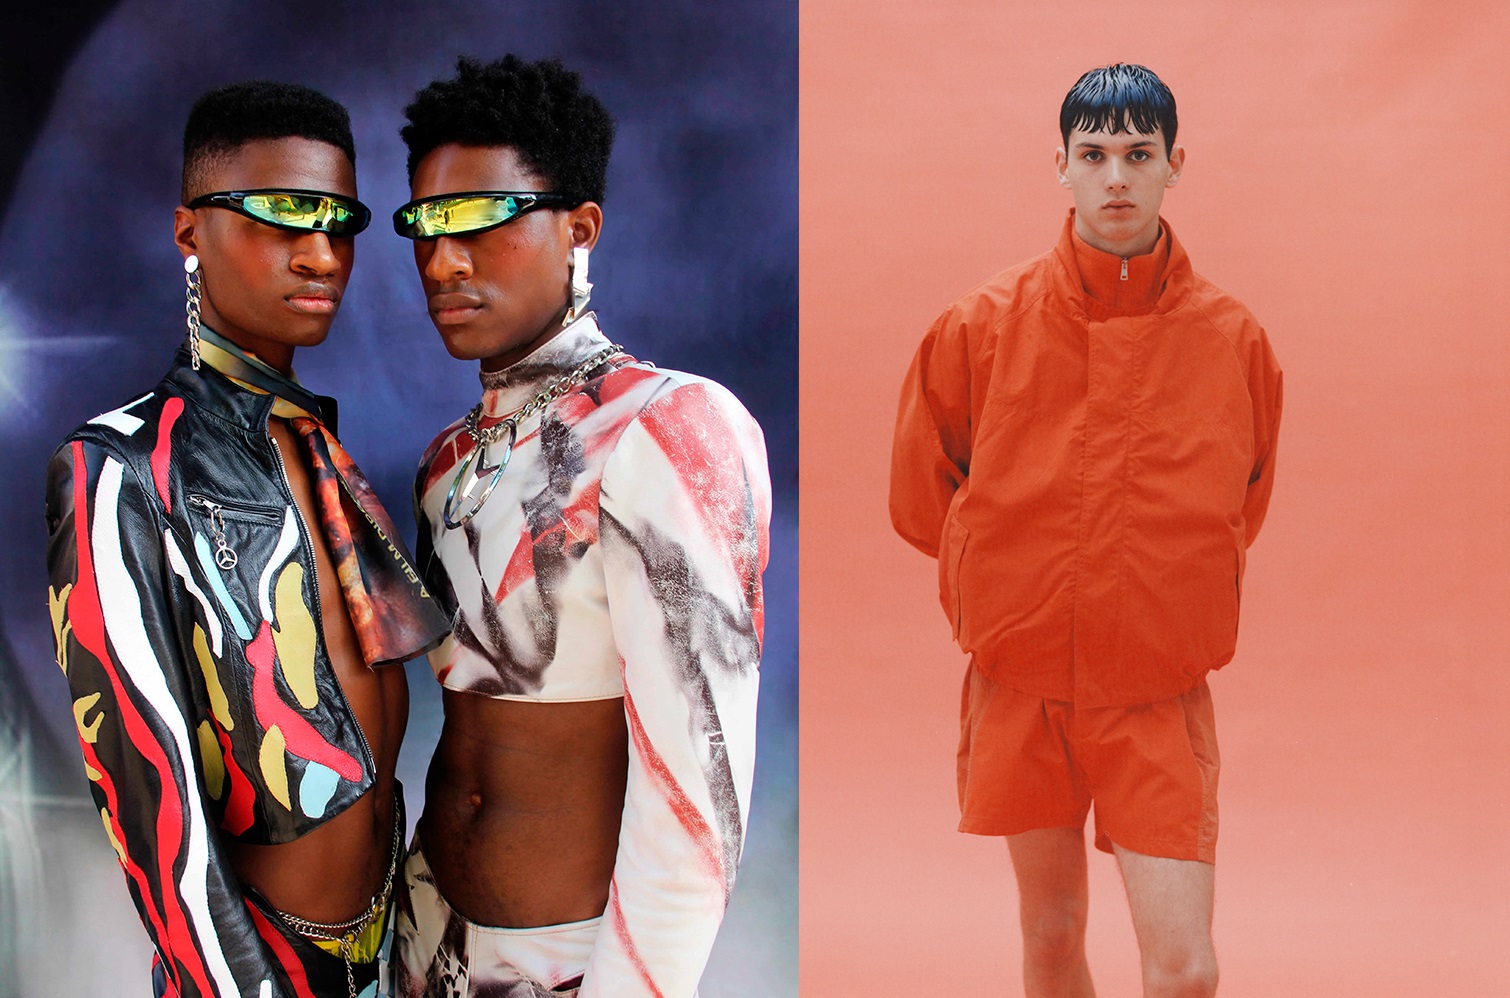 FASHION EAST Reveal the New Menswear Designers Included in Their FW19! Display